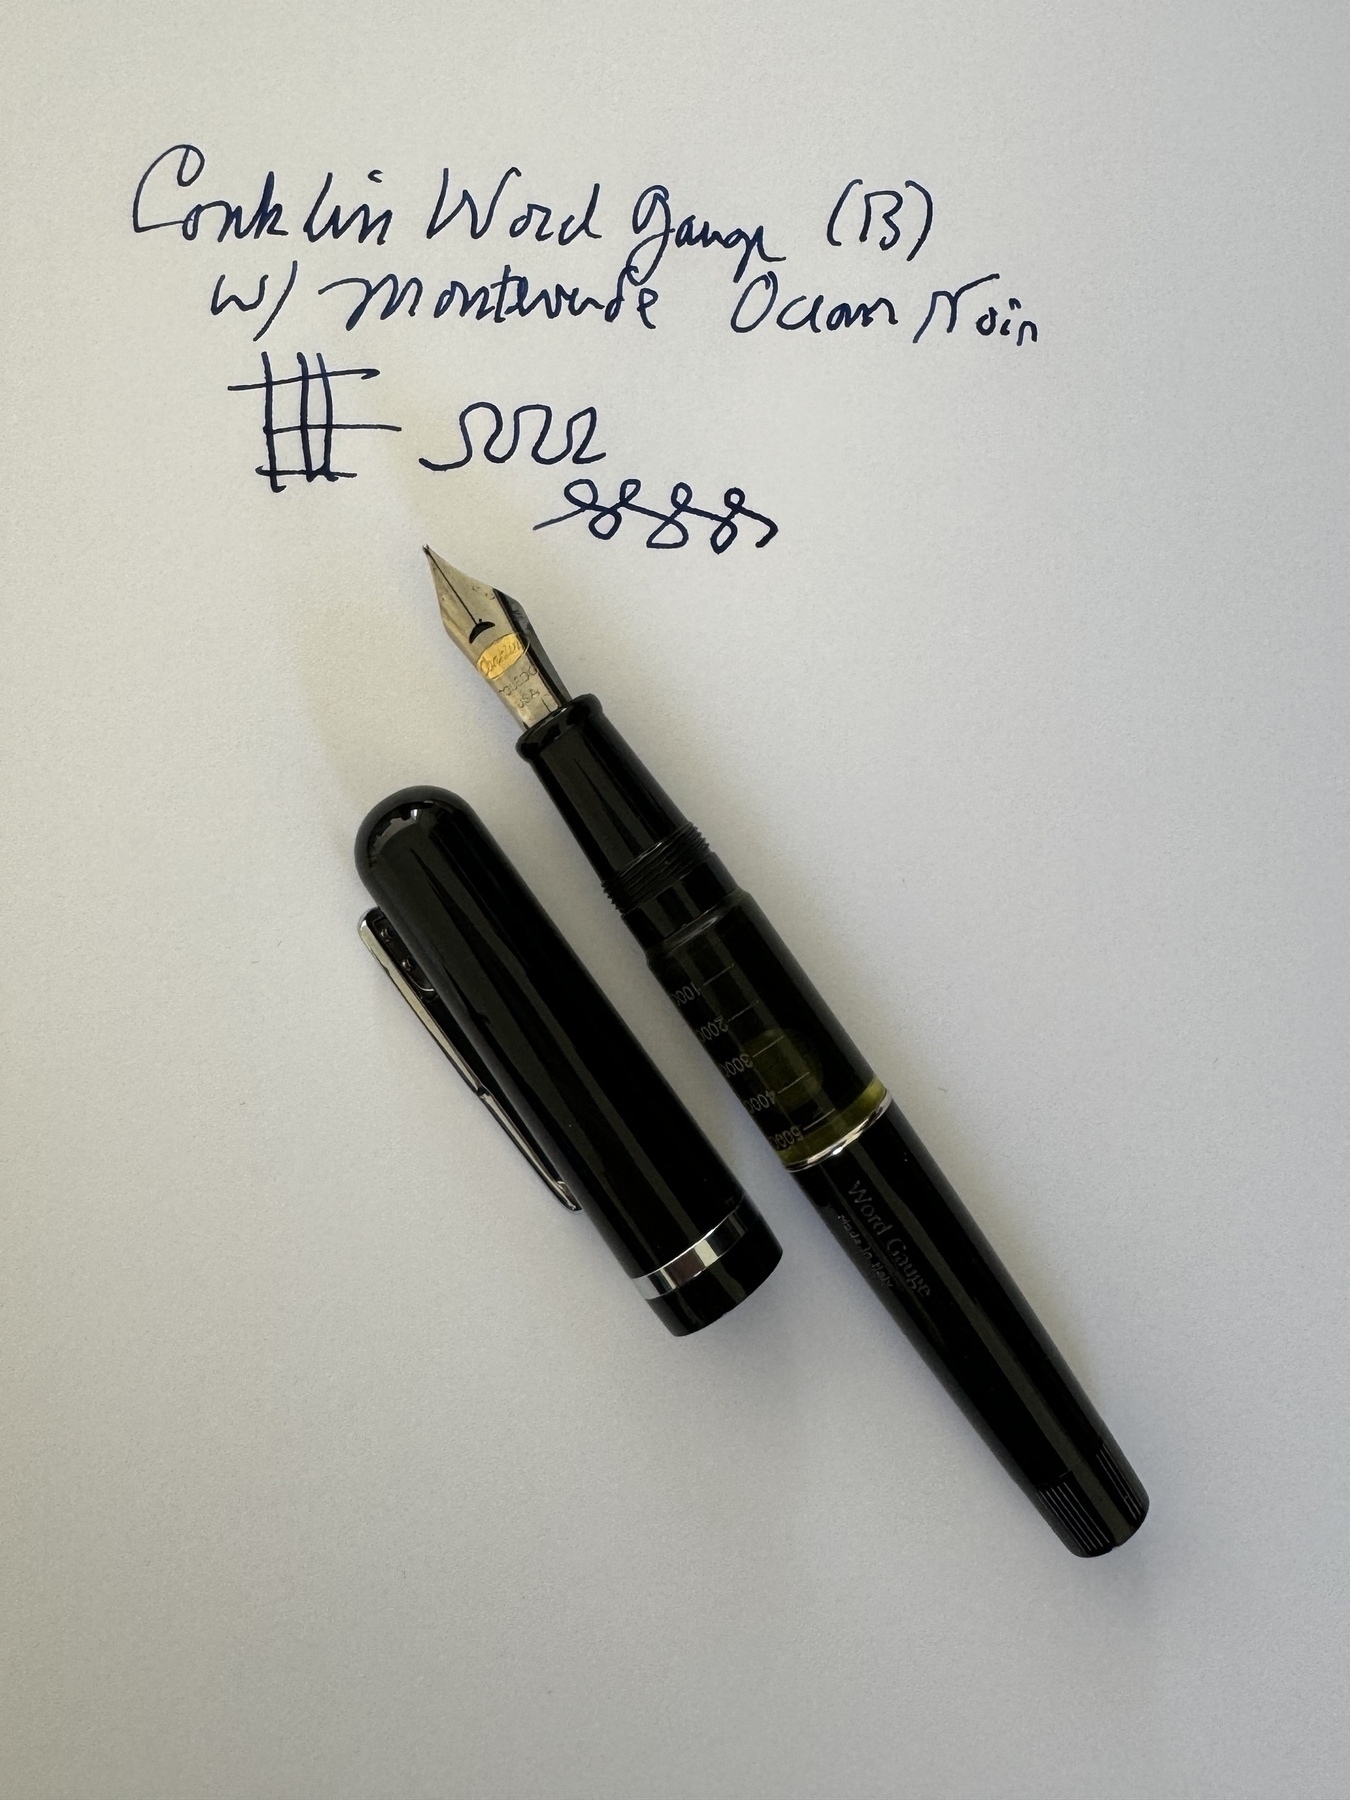 Fountain pen and ink 